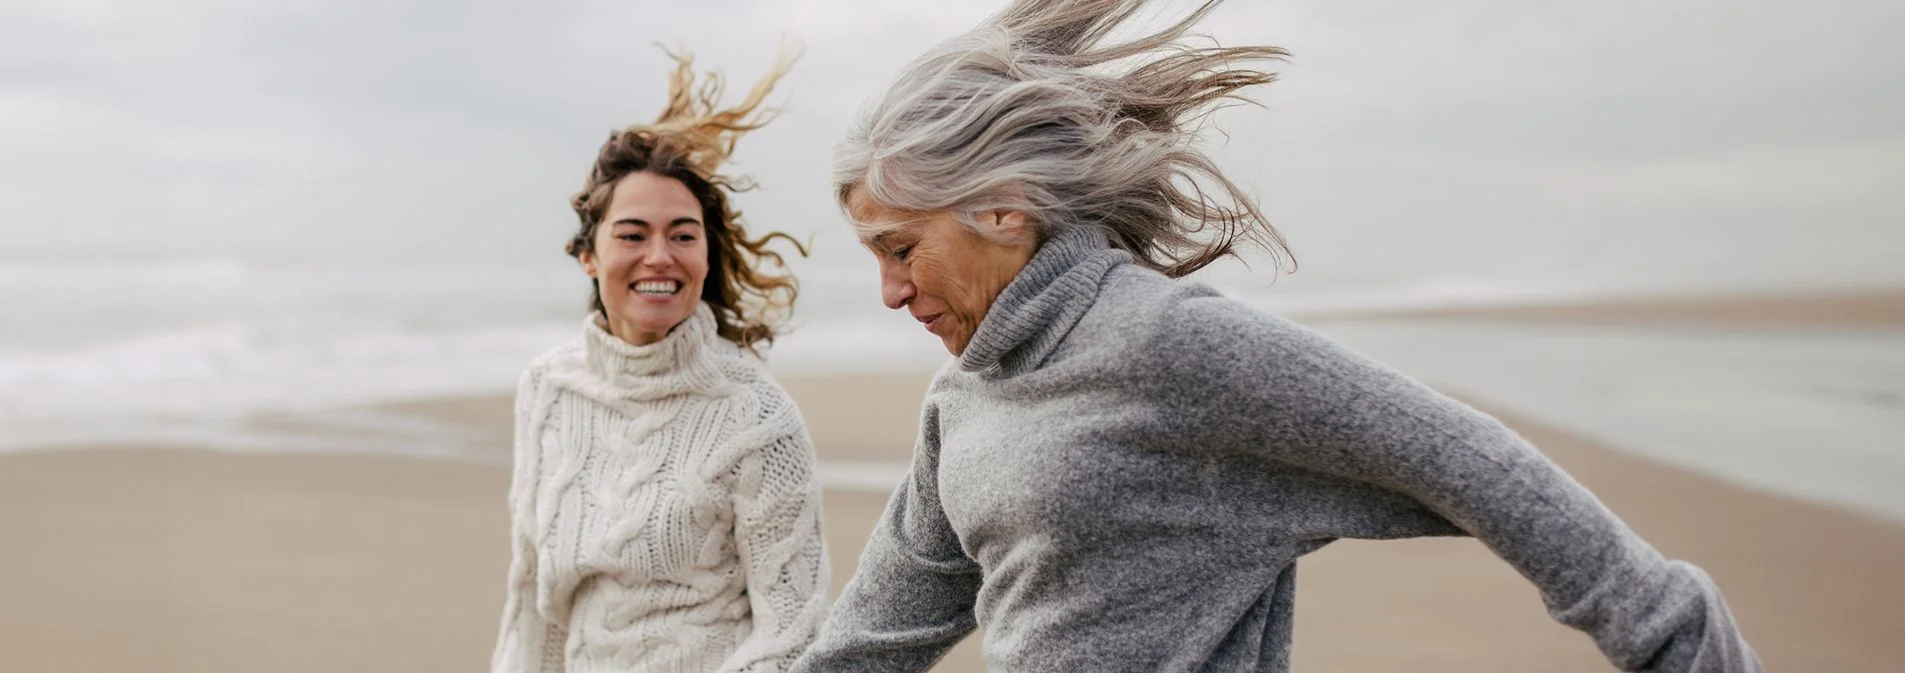 Older woman and her adult daughter enjoying a walk on the beach